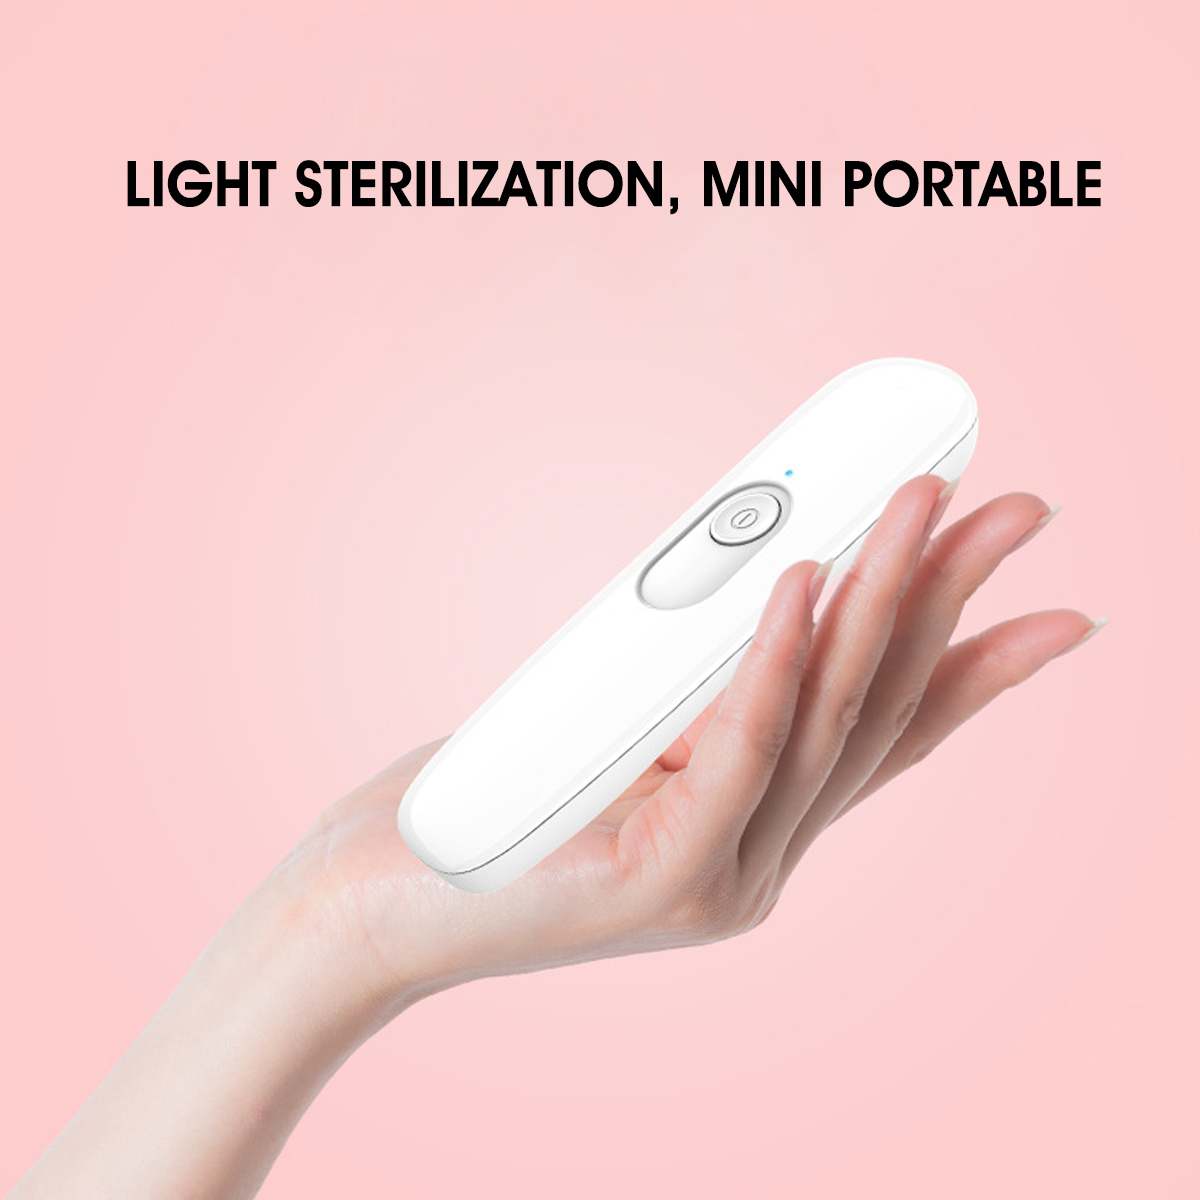 999-Sterilization-Rate-USB-Rechargeable-Mini-Portable-Ultraviolet-Handheld-Disinfection-Lamp-UVC-Ger-1700558-10